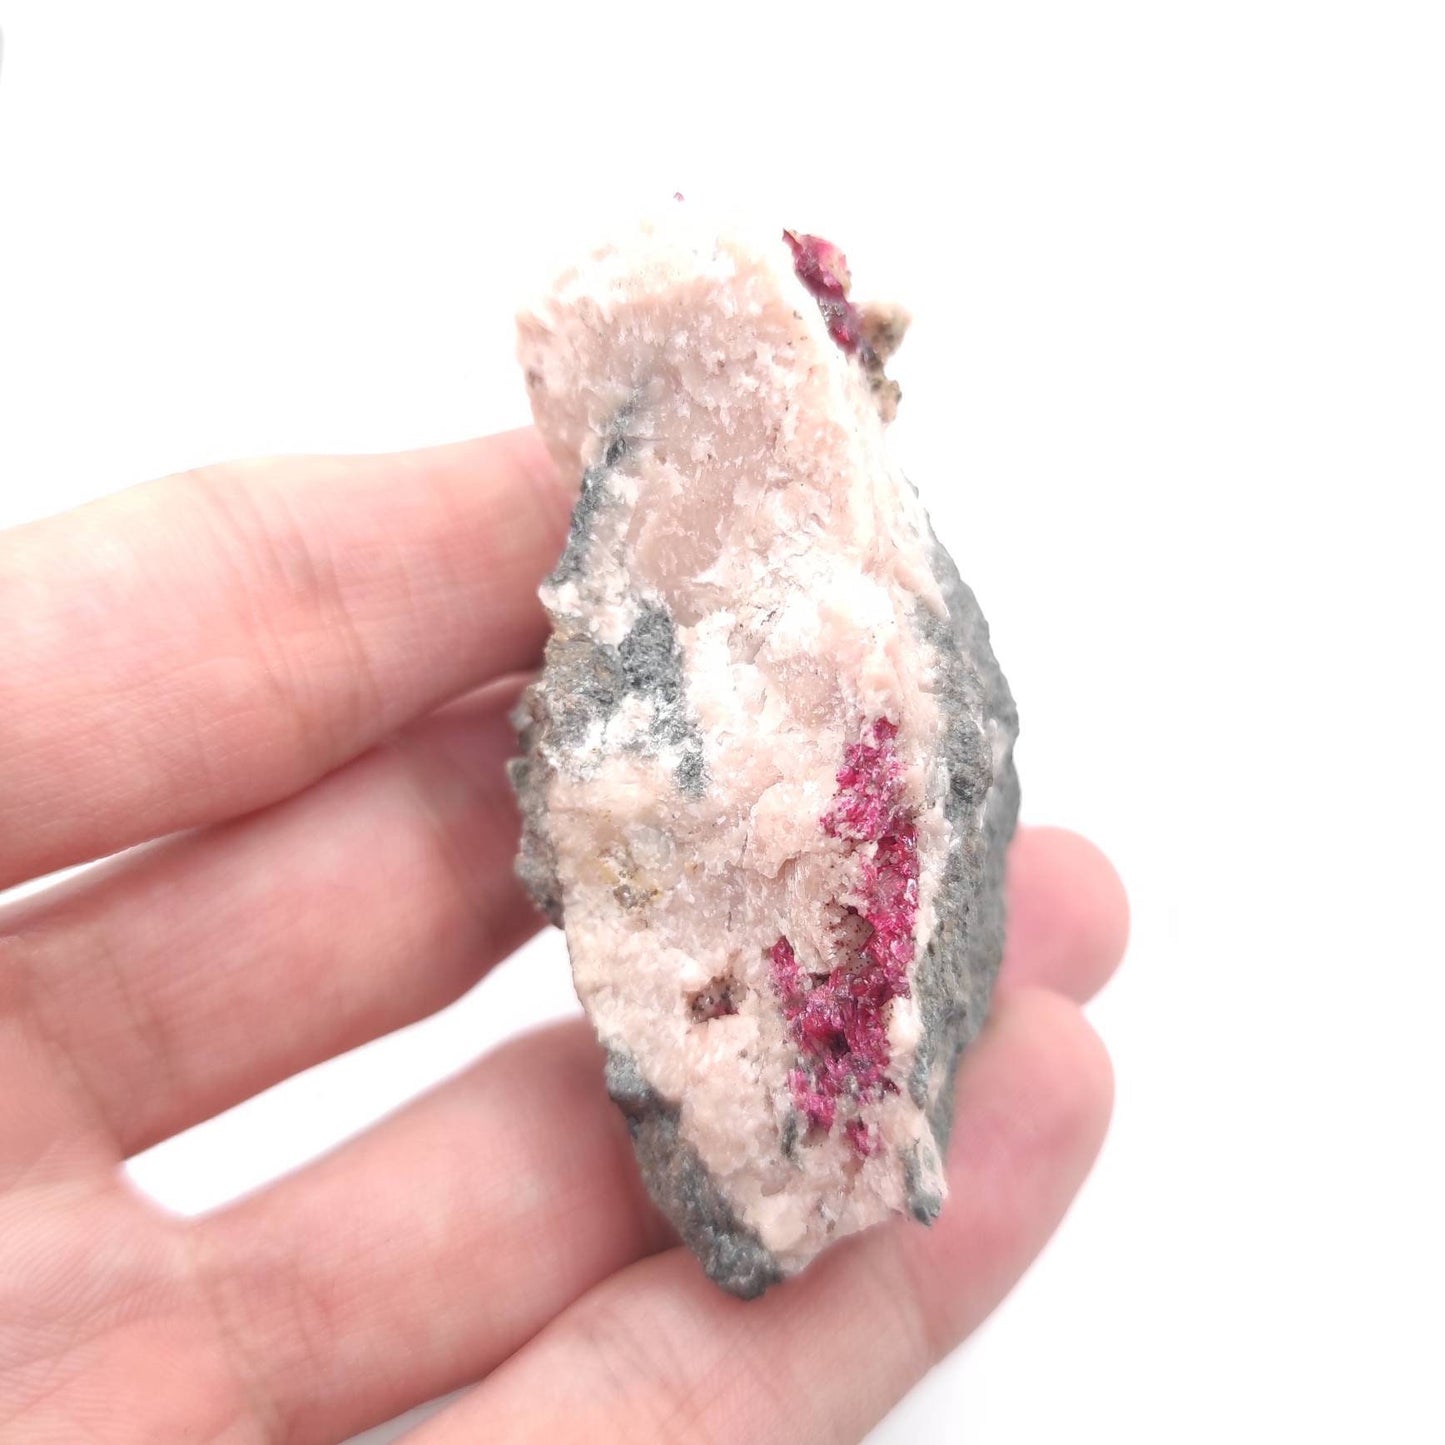 79g Roselite in Matrix from Bou Azzer, Morocco - Rare Pink Roselite Mineral - Rare Mineral Specimen - Natural Crystals - Rough Gemstones